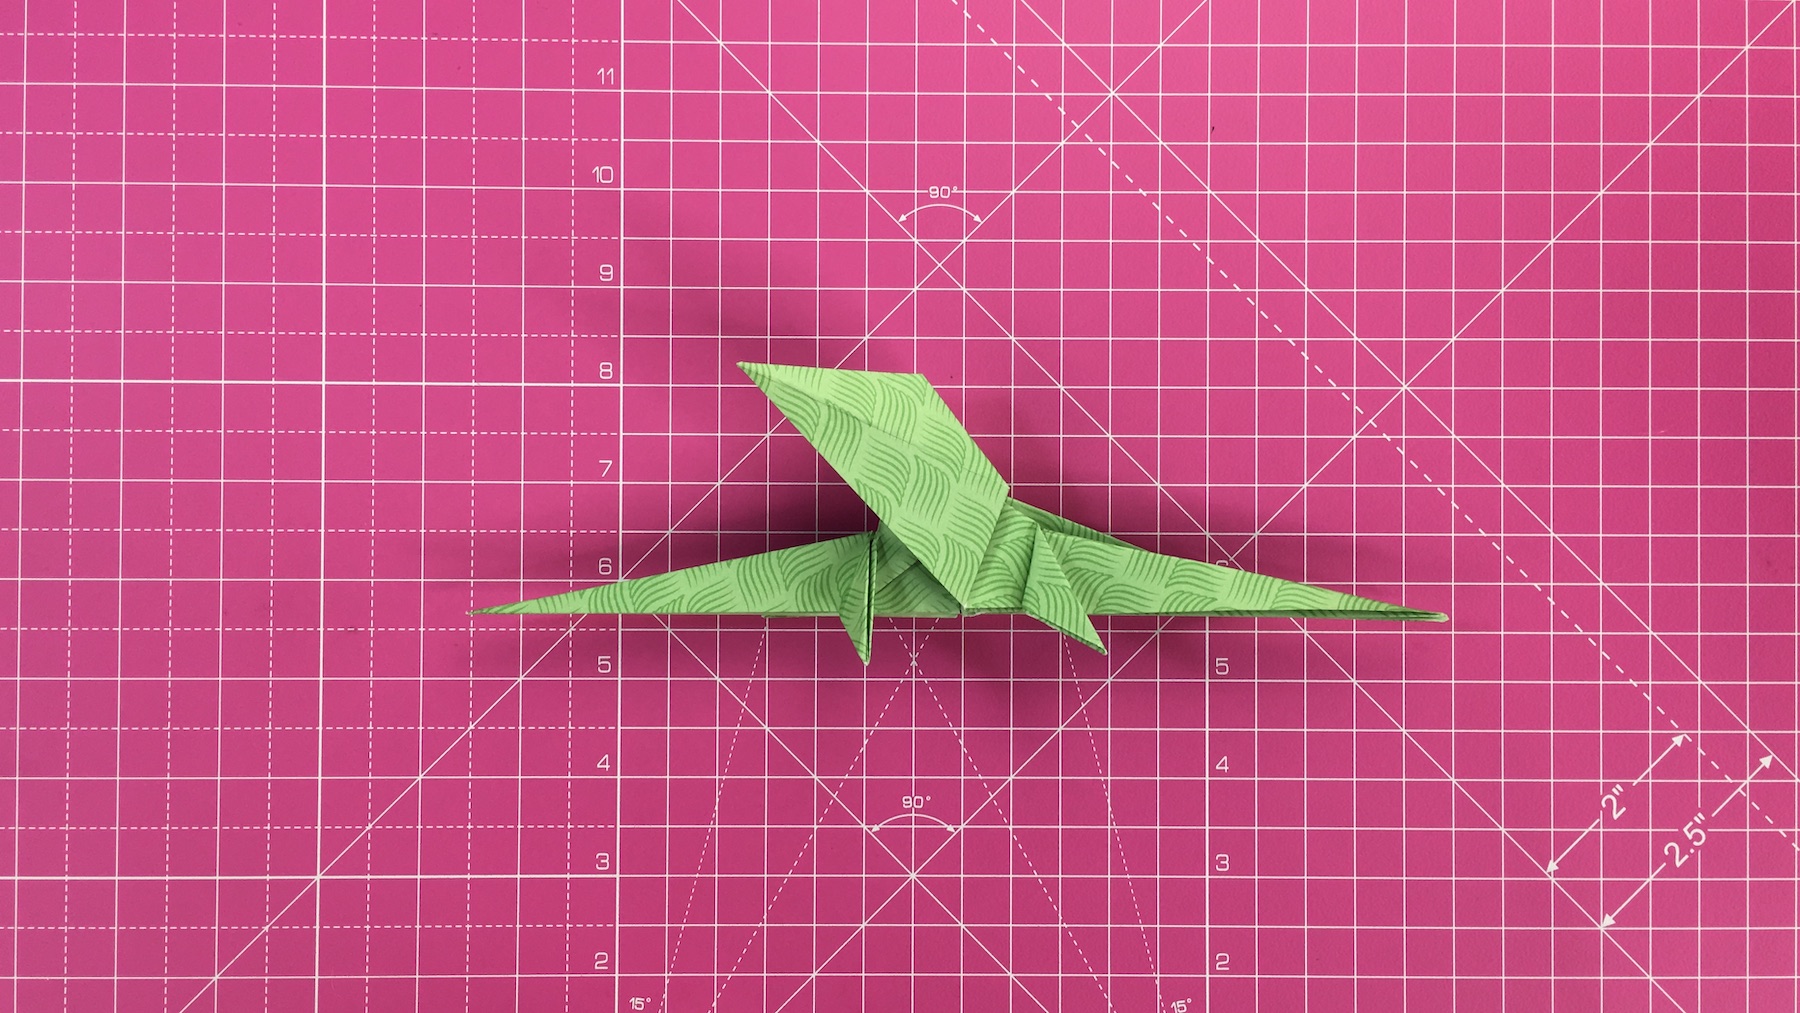 How to make an origami dragon, origami dragon tutorial - step 39b